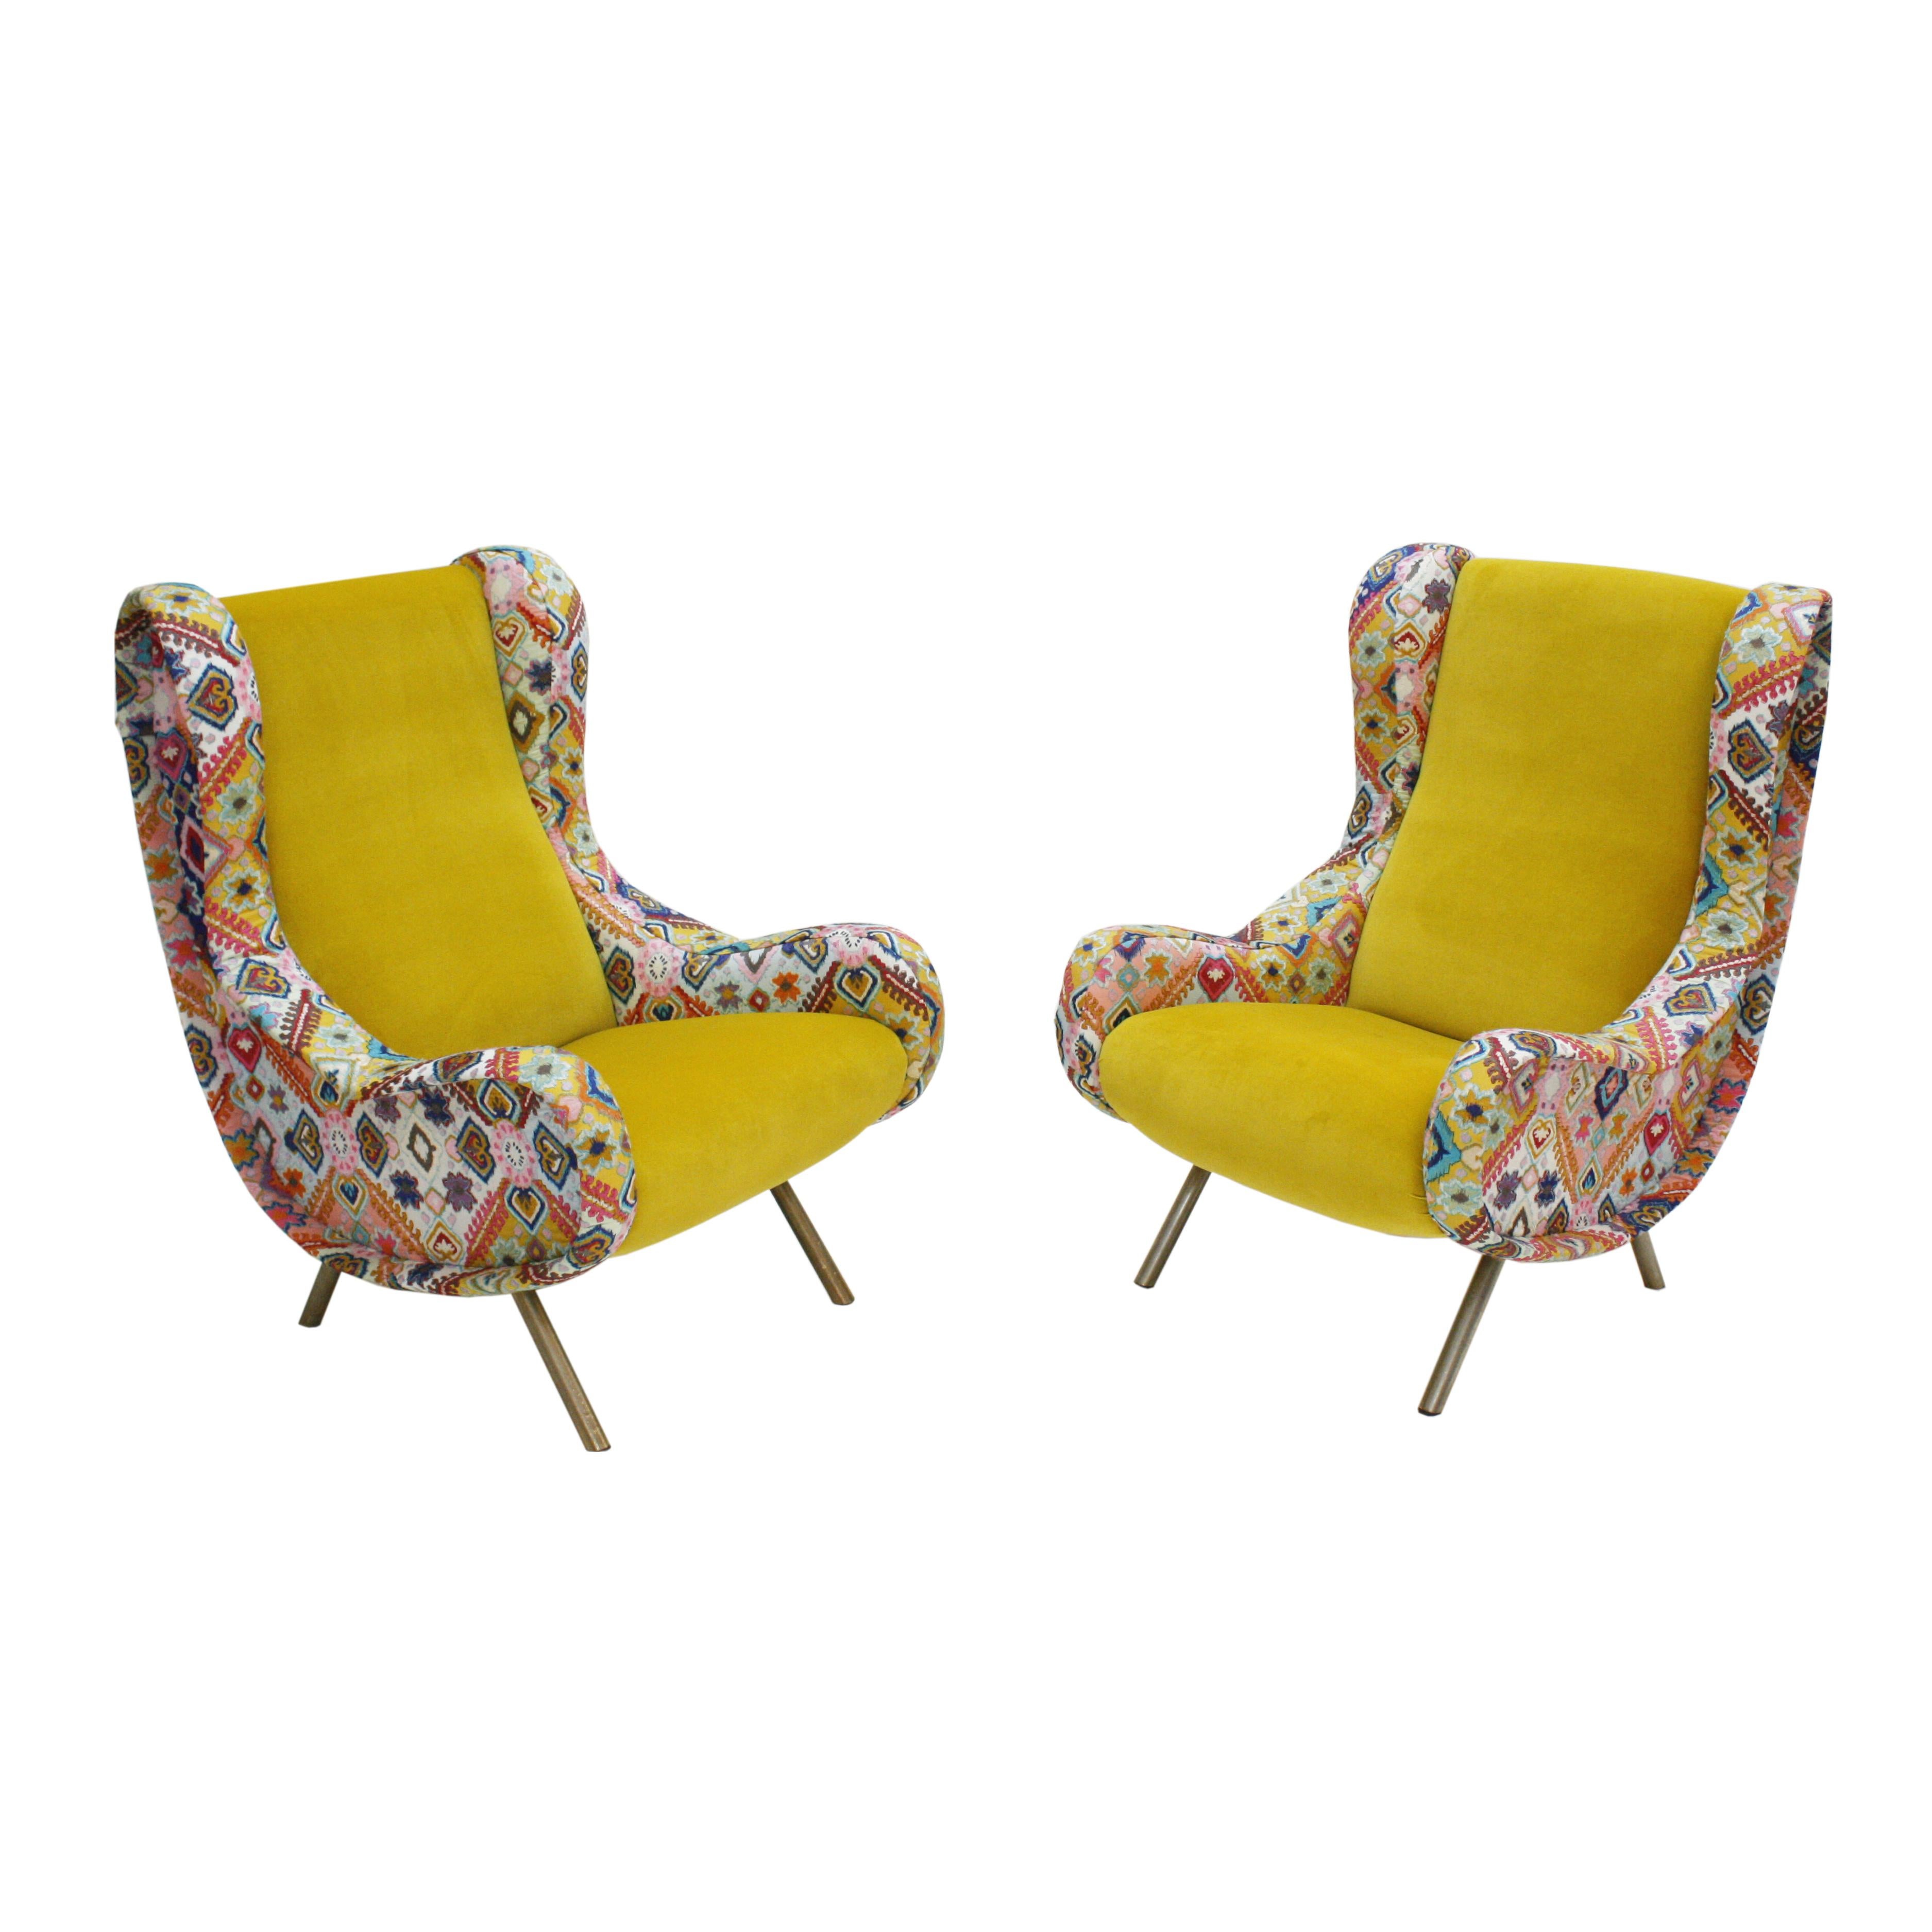 Pair of Italian armchairs designed by Marco Zanuso (1916-2001 Milán) model Senior, edited by Arflex. Made of solid wood structure and brass legs. Upholstered in yellow cotton velvet designed by India Madhavi and embroidery pattern fabric model